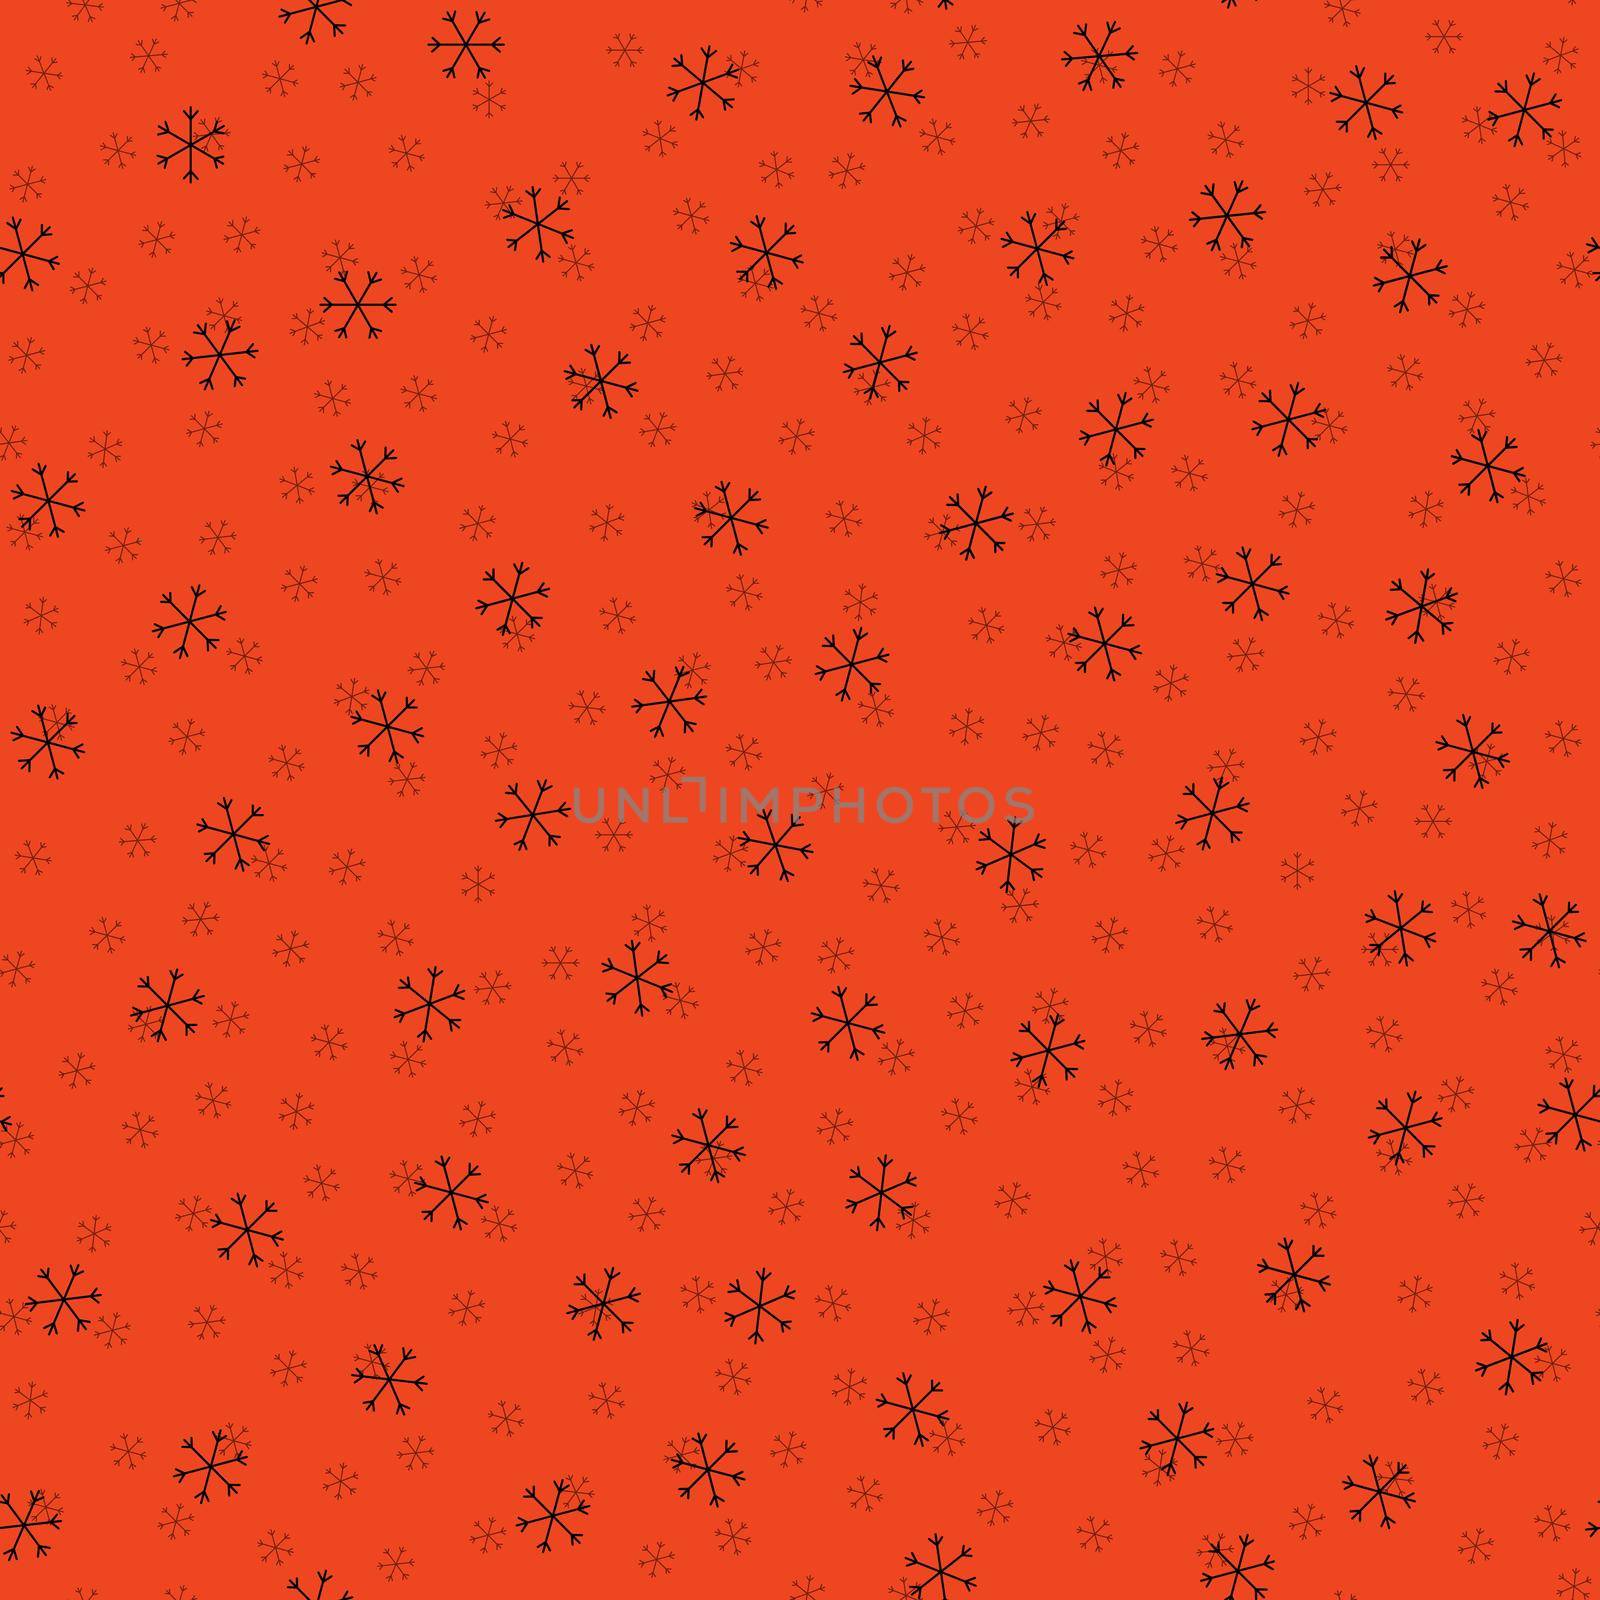 Seamless Christmas pattern doodle with hand random drawn snowflakes.Wrapping paper for presents, funny textile fabric print, design,decor, food wrap, backgrounds. new year.Raster copy.Coral, black by Angelsmoon